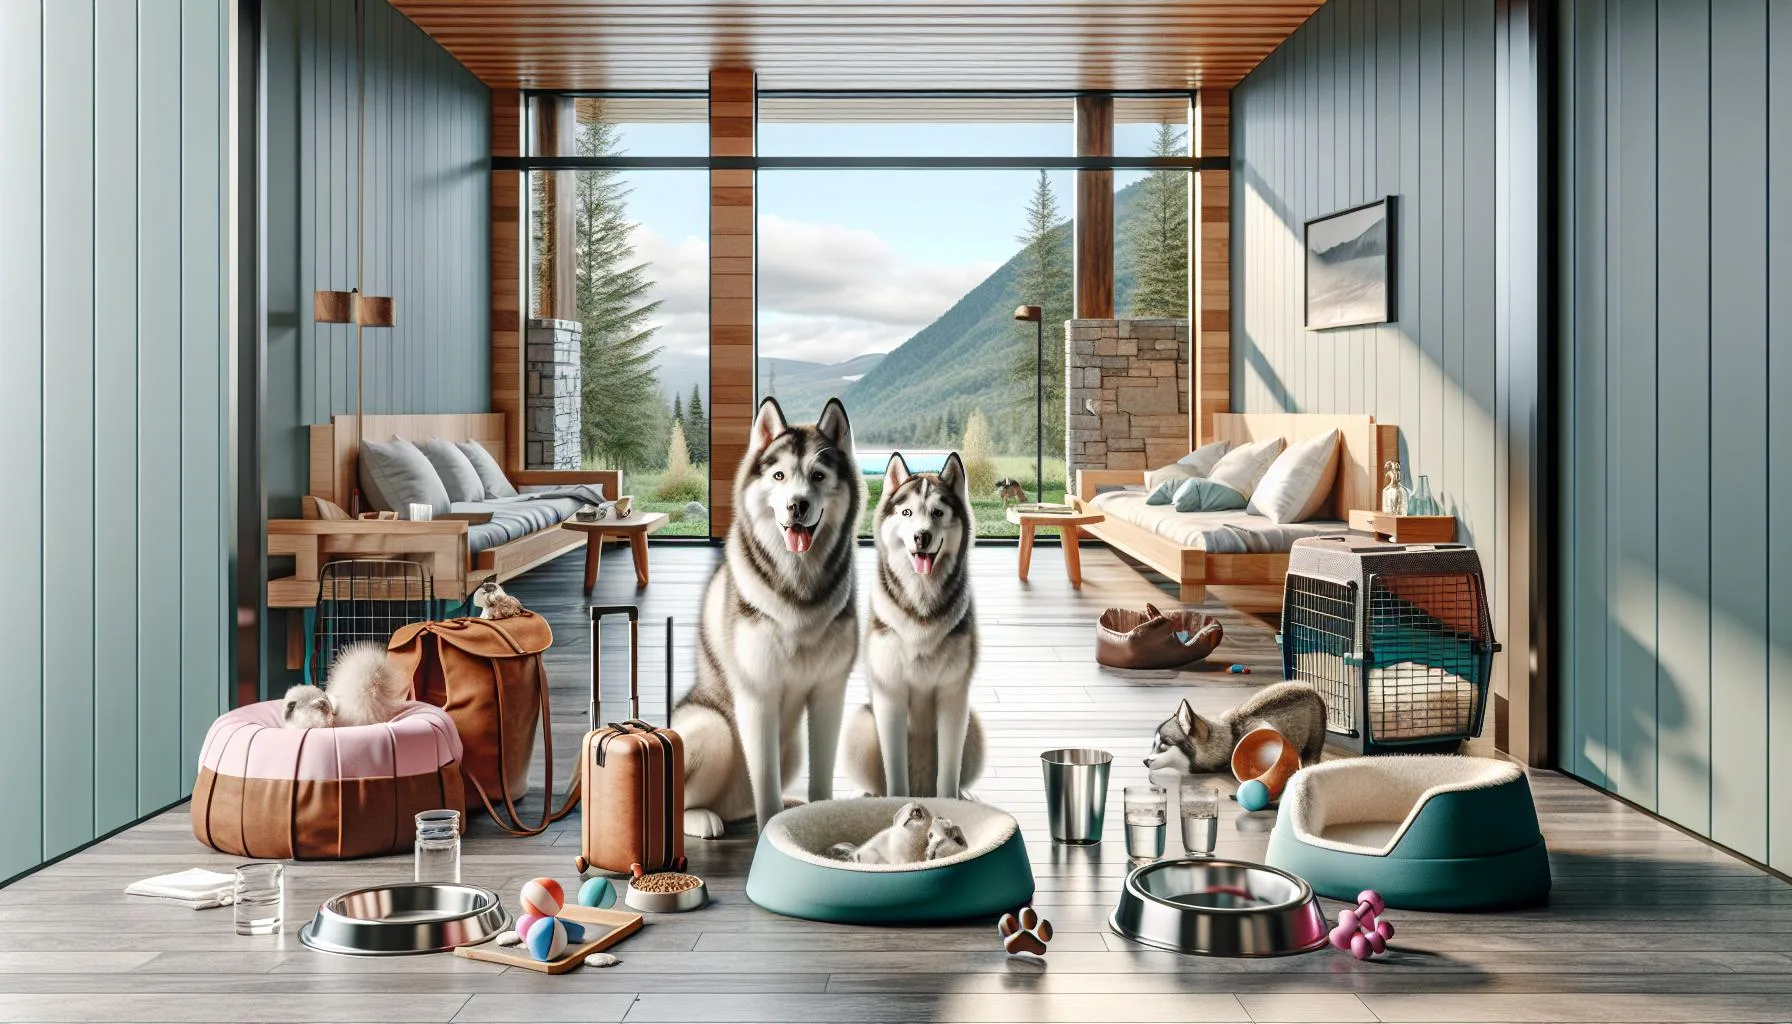 Experience Allergy-Friendly Husky Care – Book Now!